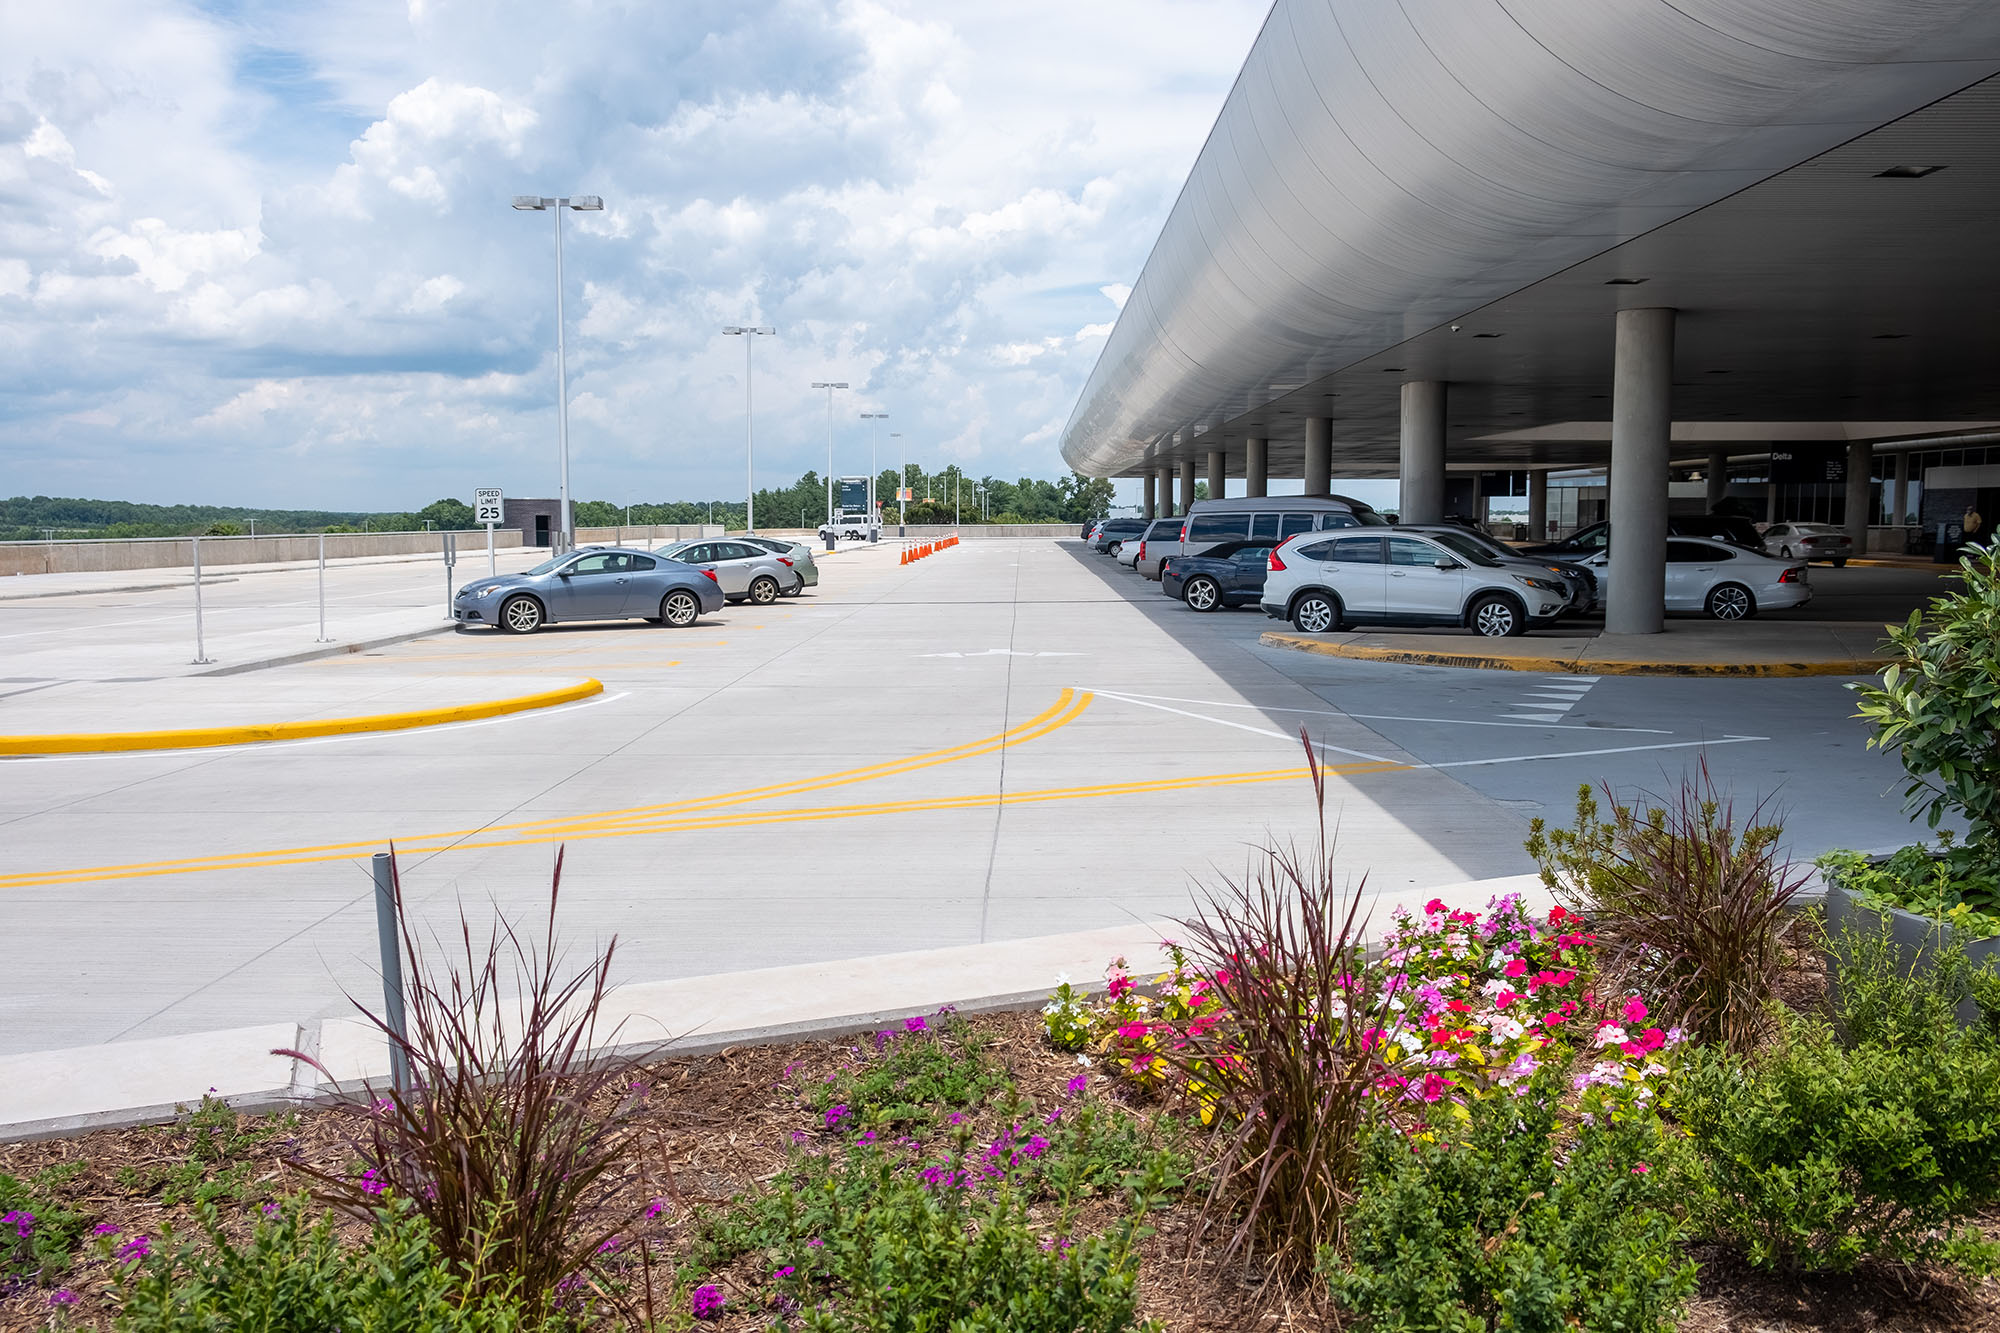 Elevated roadway at PTIA with terminal, parked cars, and landscaping in foreground